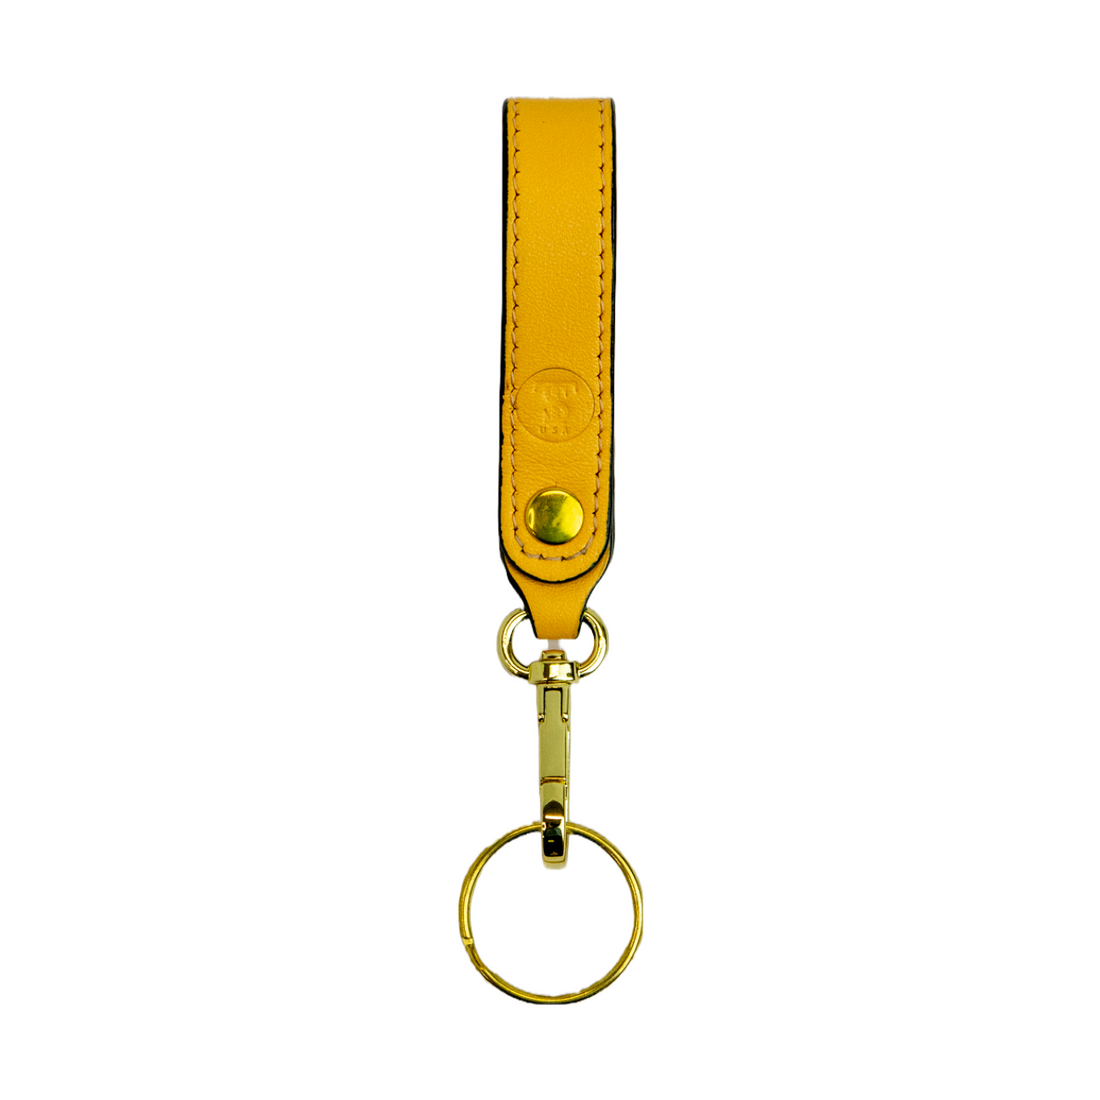 T5 Key chain strap handcrafted by designer Liv McClintock in smooth calf leather in saffron yellow.